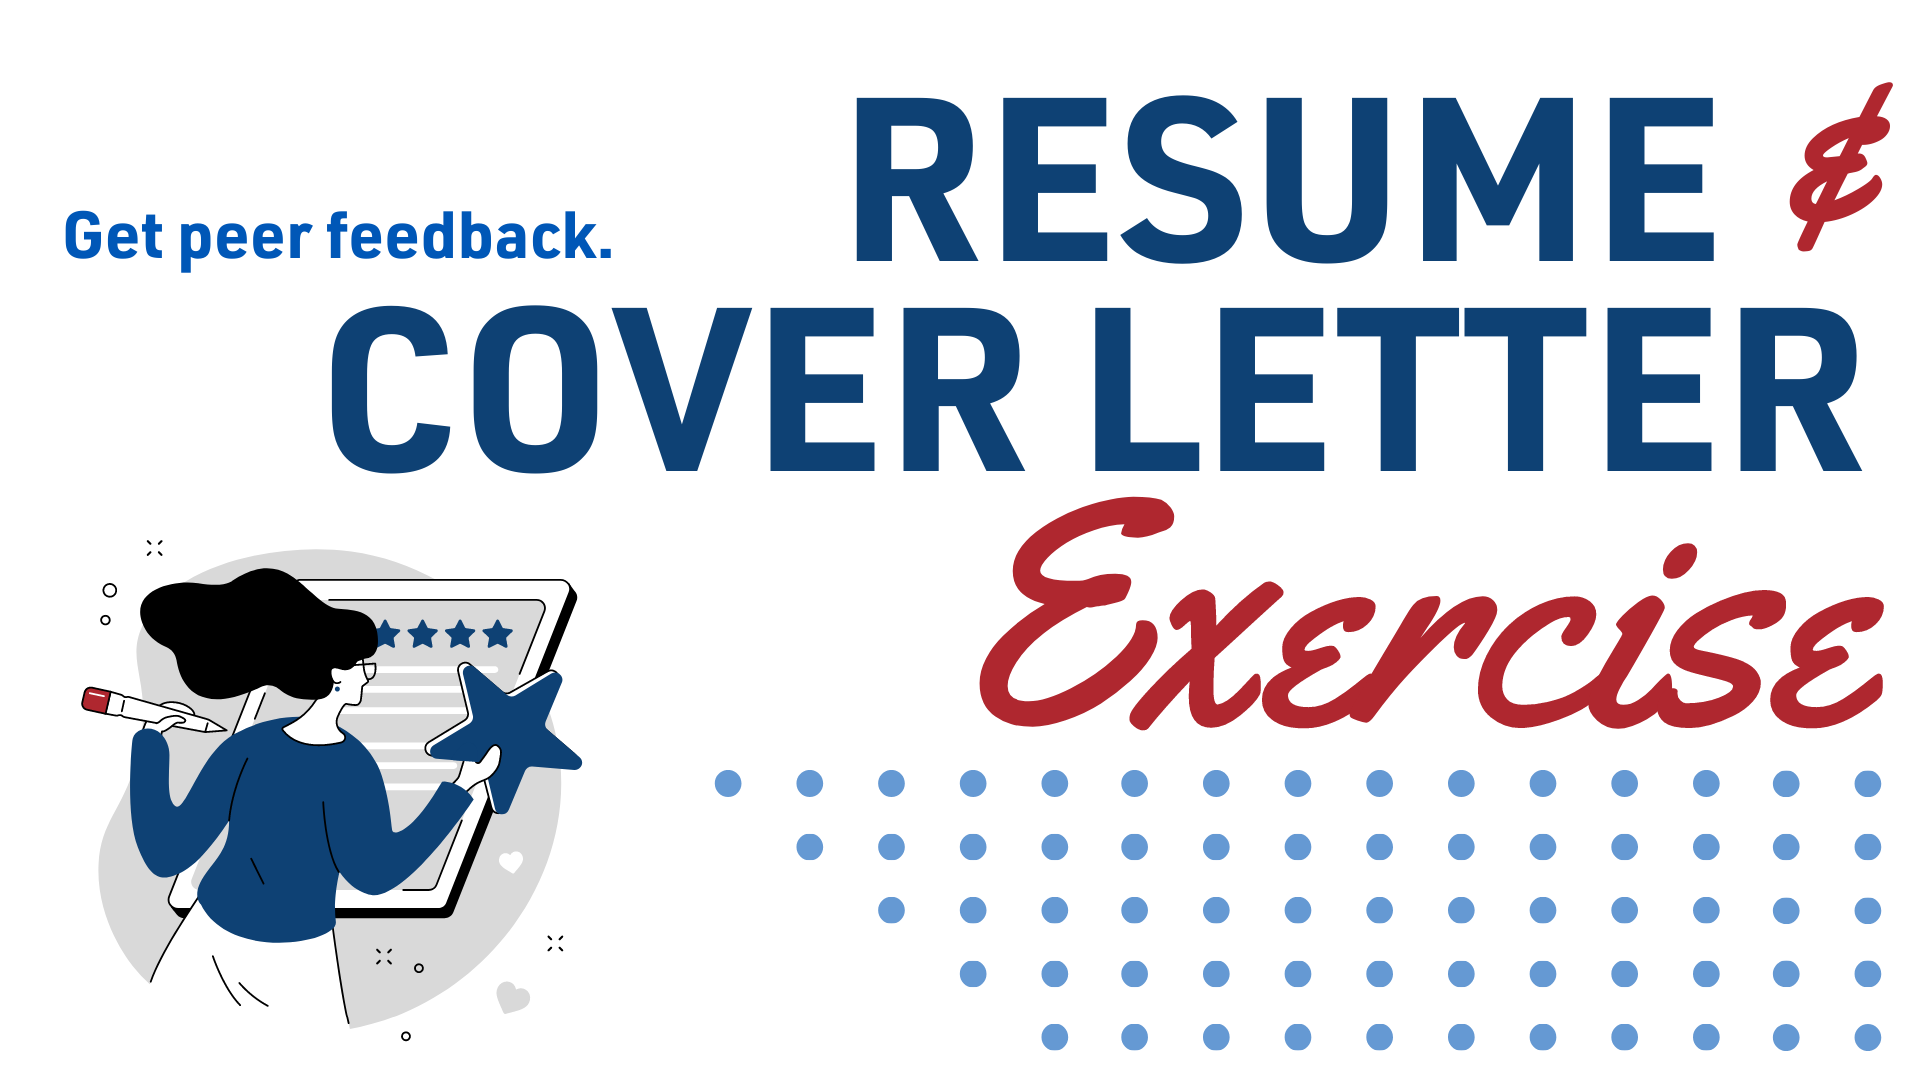 Resume and Cover Letter Exercise